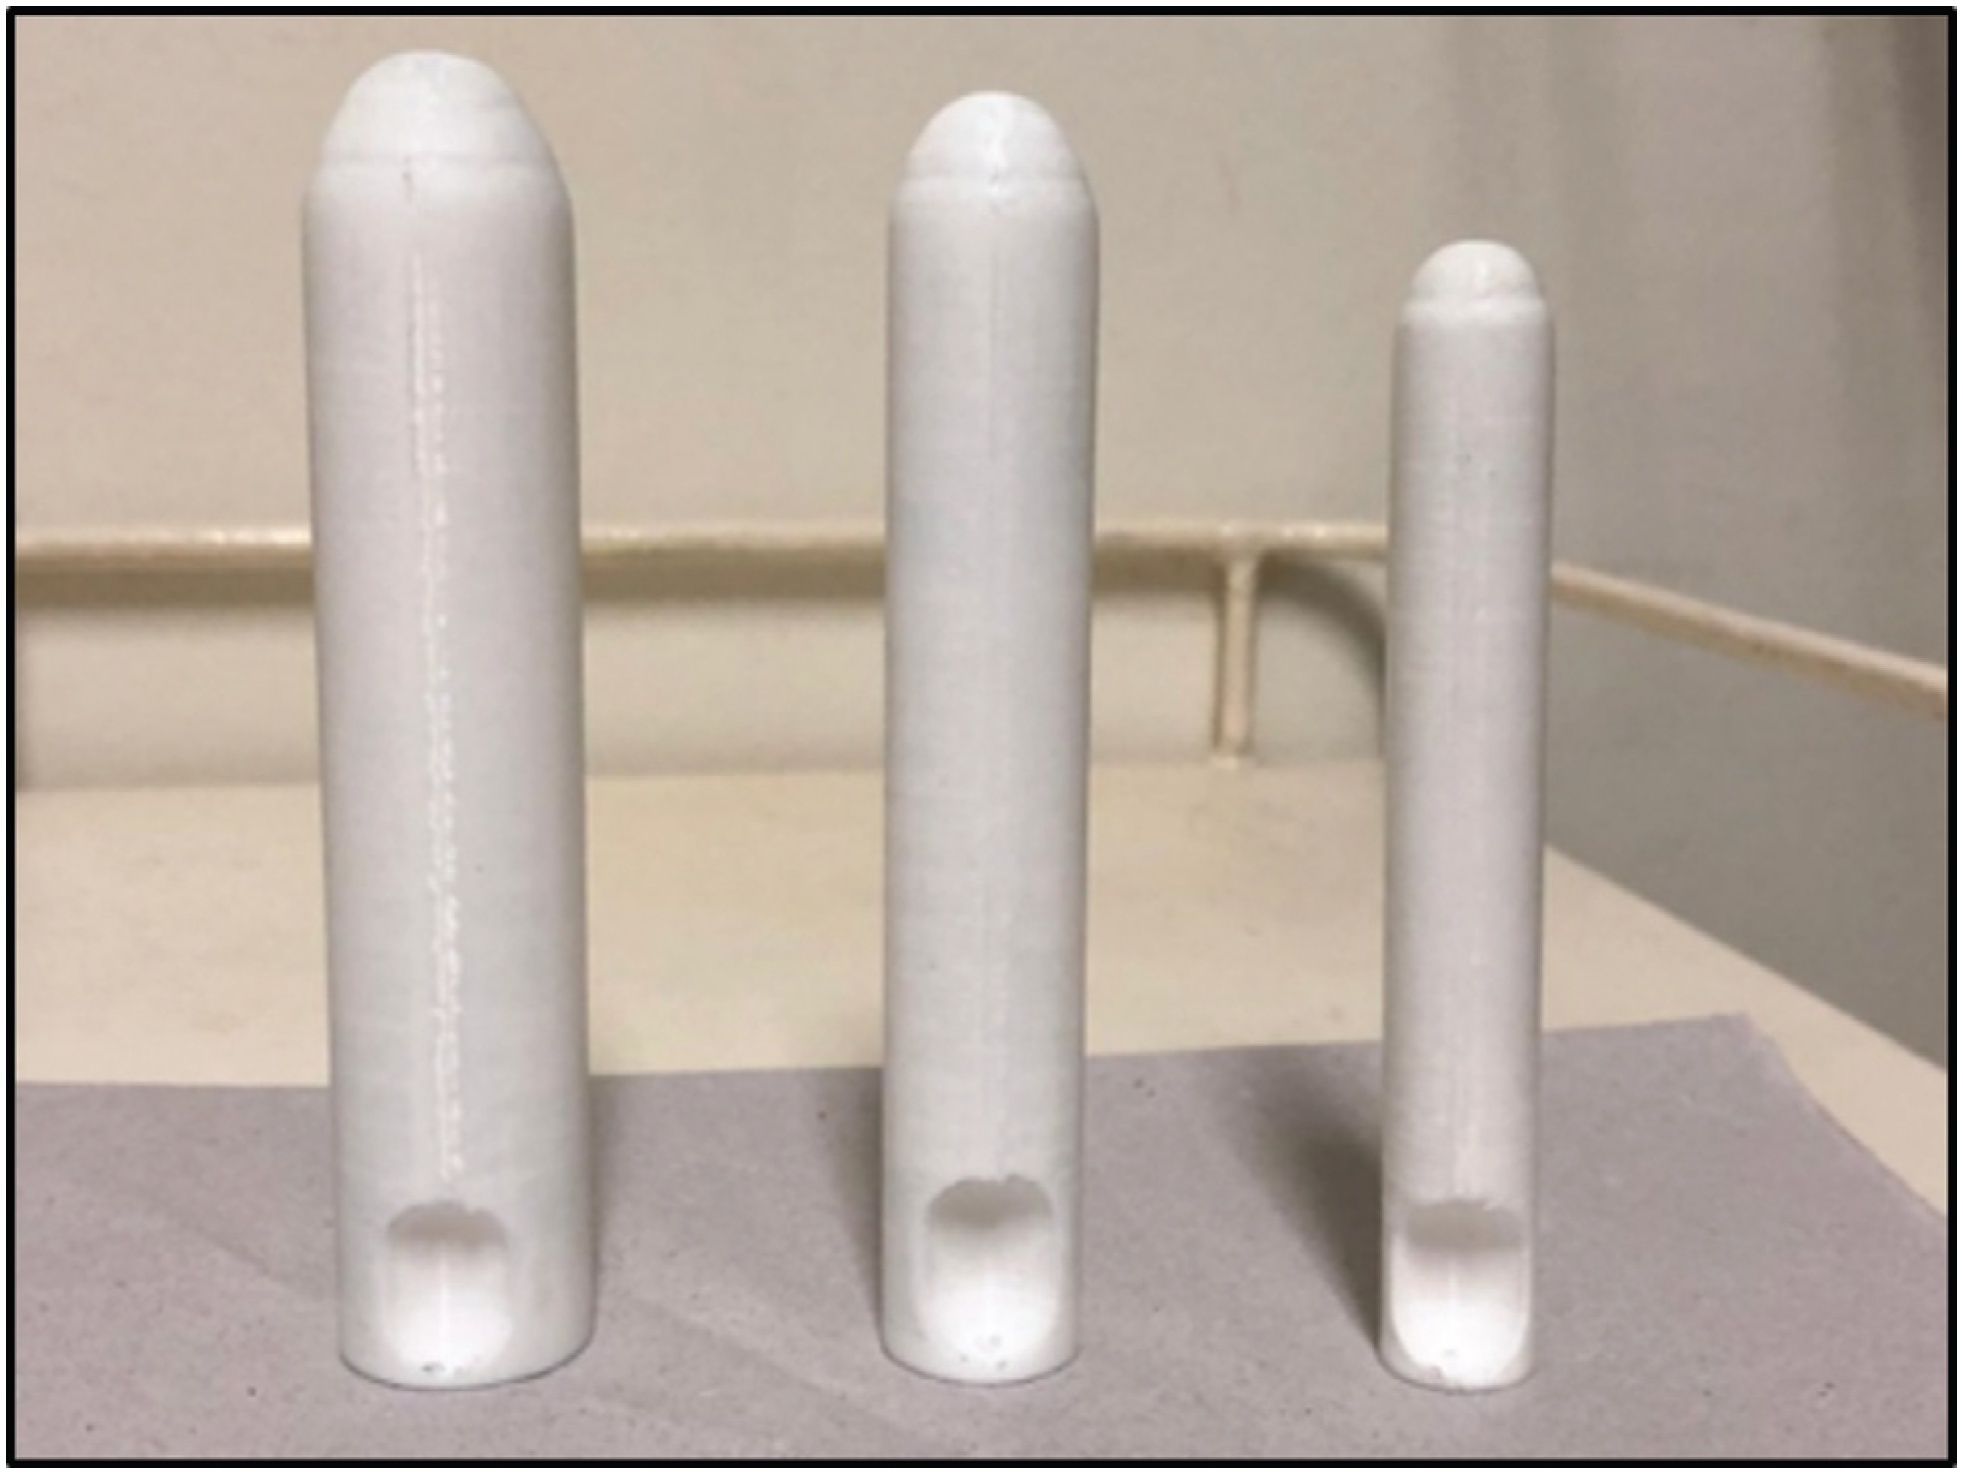 Three-dimensional Printer Molds for Vaginal Agenesis: An Individualized Approach as Conservative Treatment